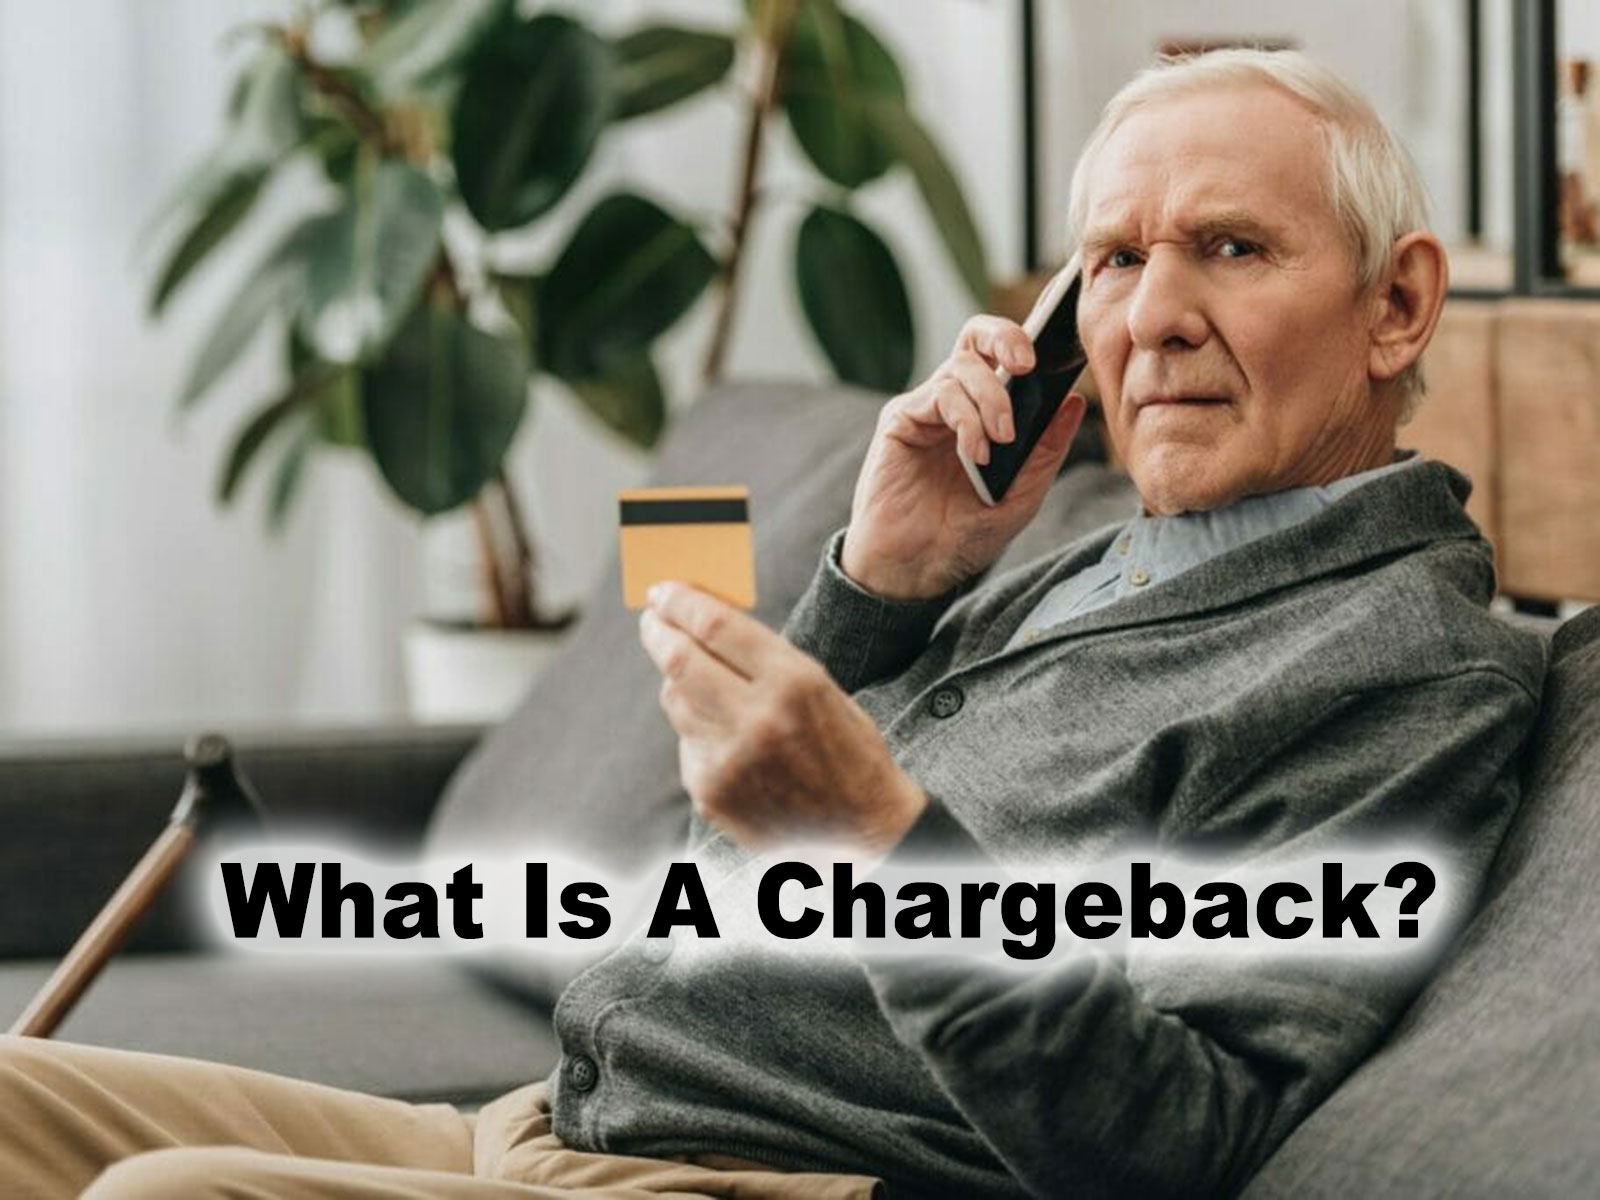 https://vendreo.com/what-is-a-chargeback/